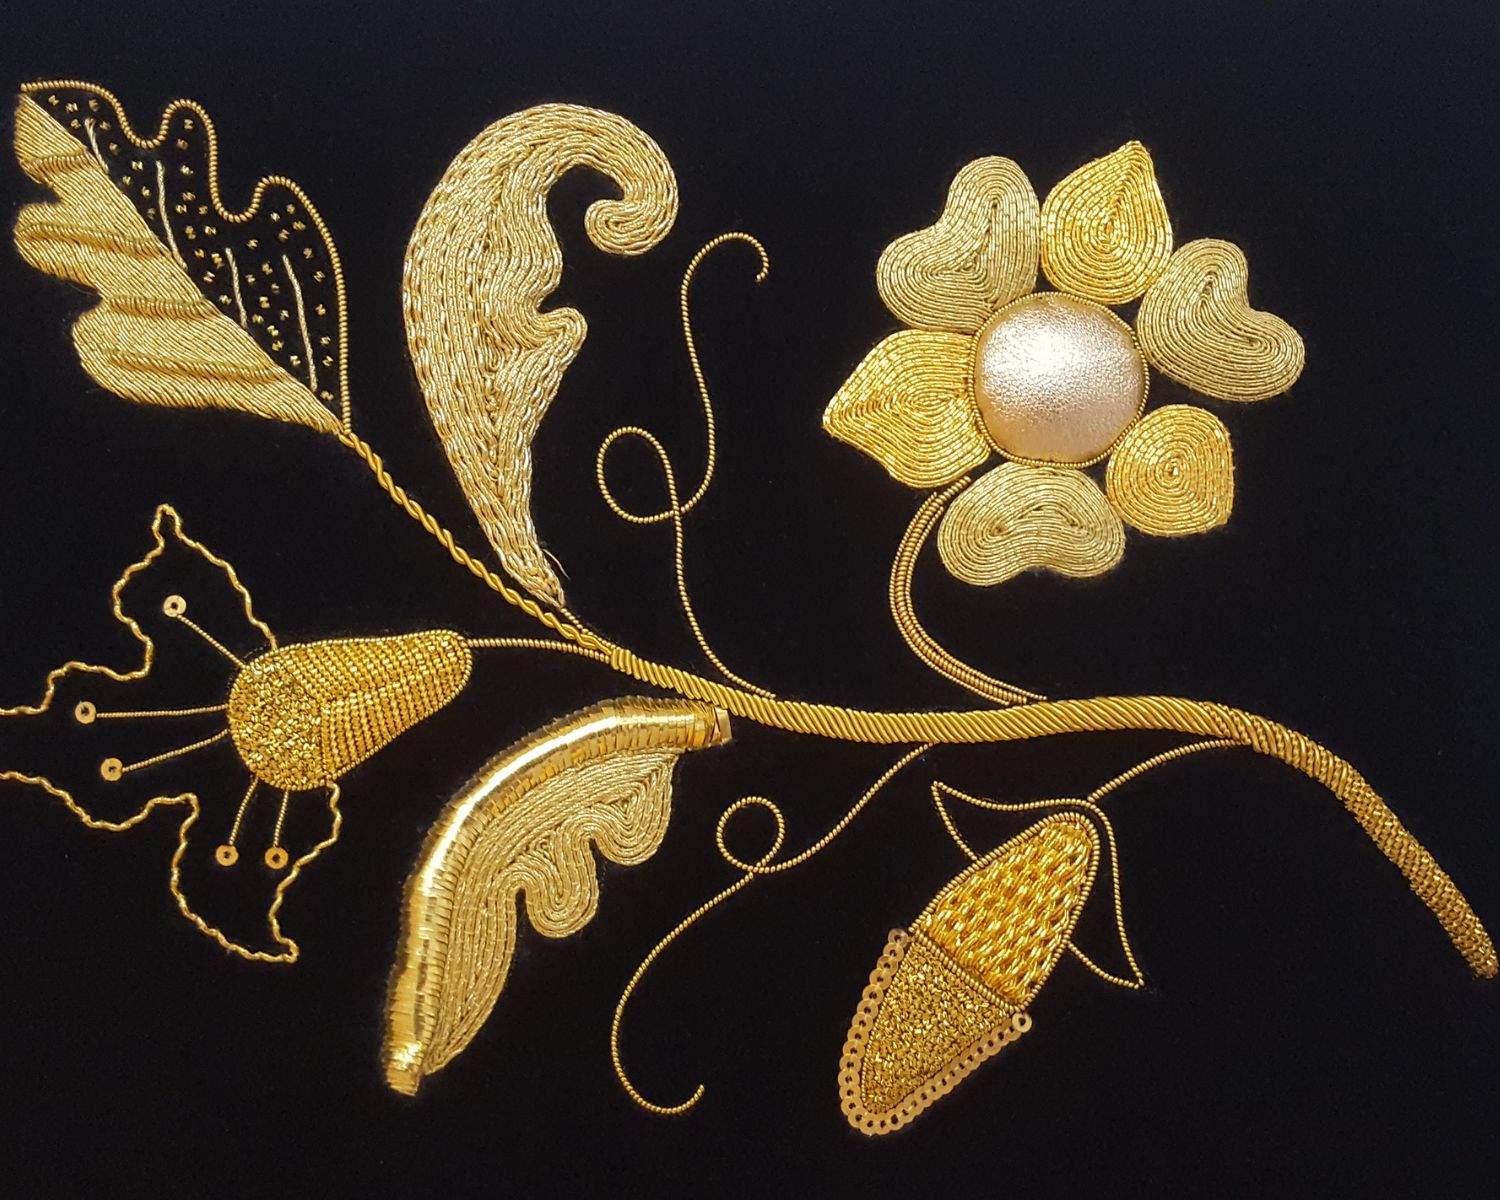 19-astounding-facts-about-goldwork-embroidery